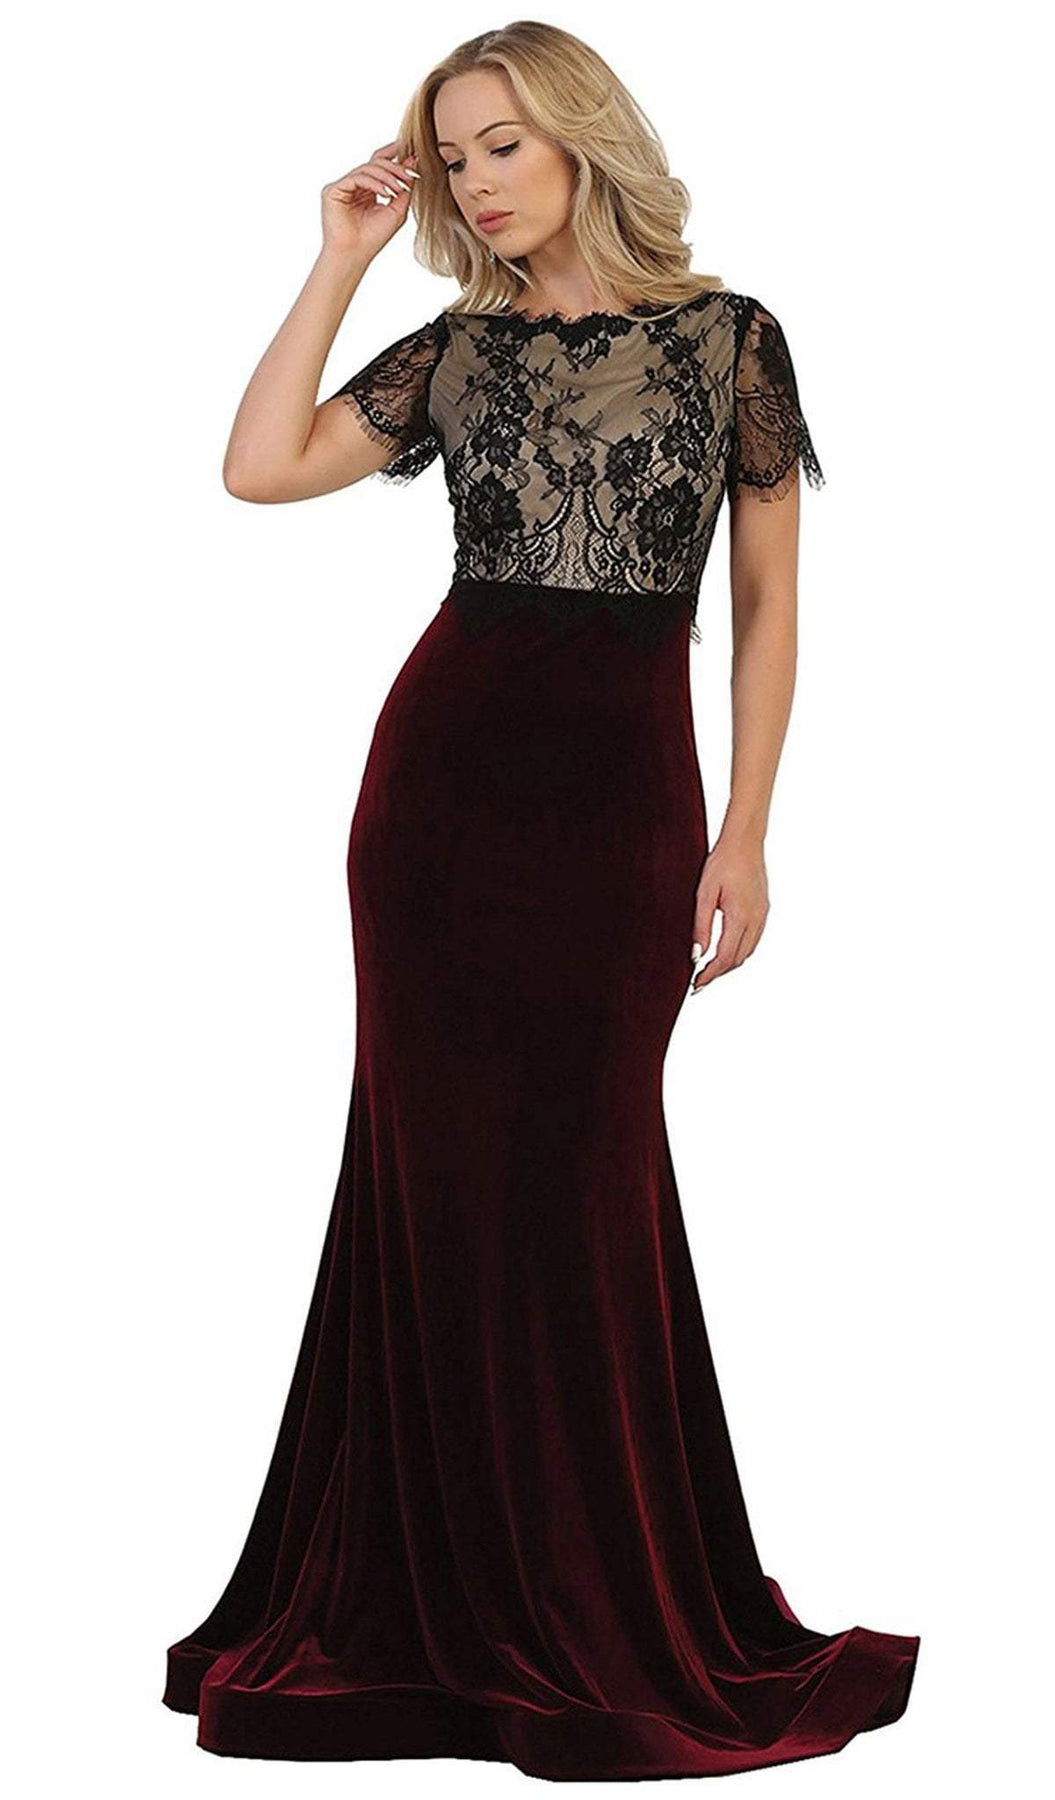 May Queen - Lace Bateau Sheath Evening Dress Special Occasion Dress 4 / Burgundy